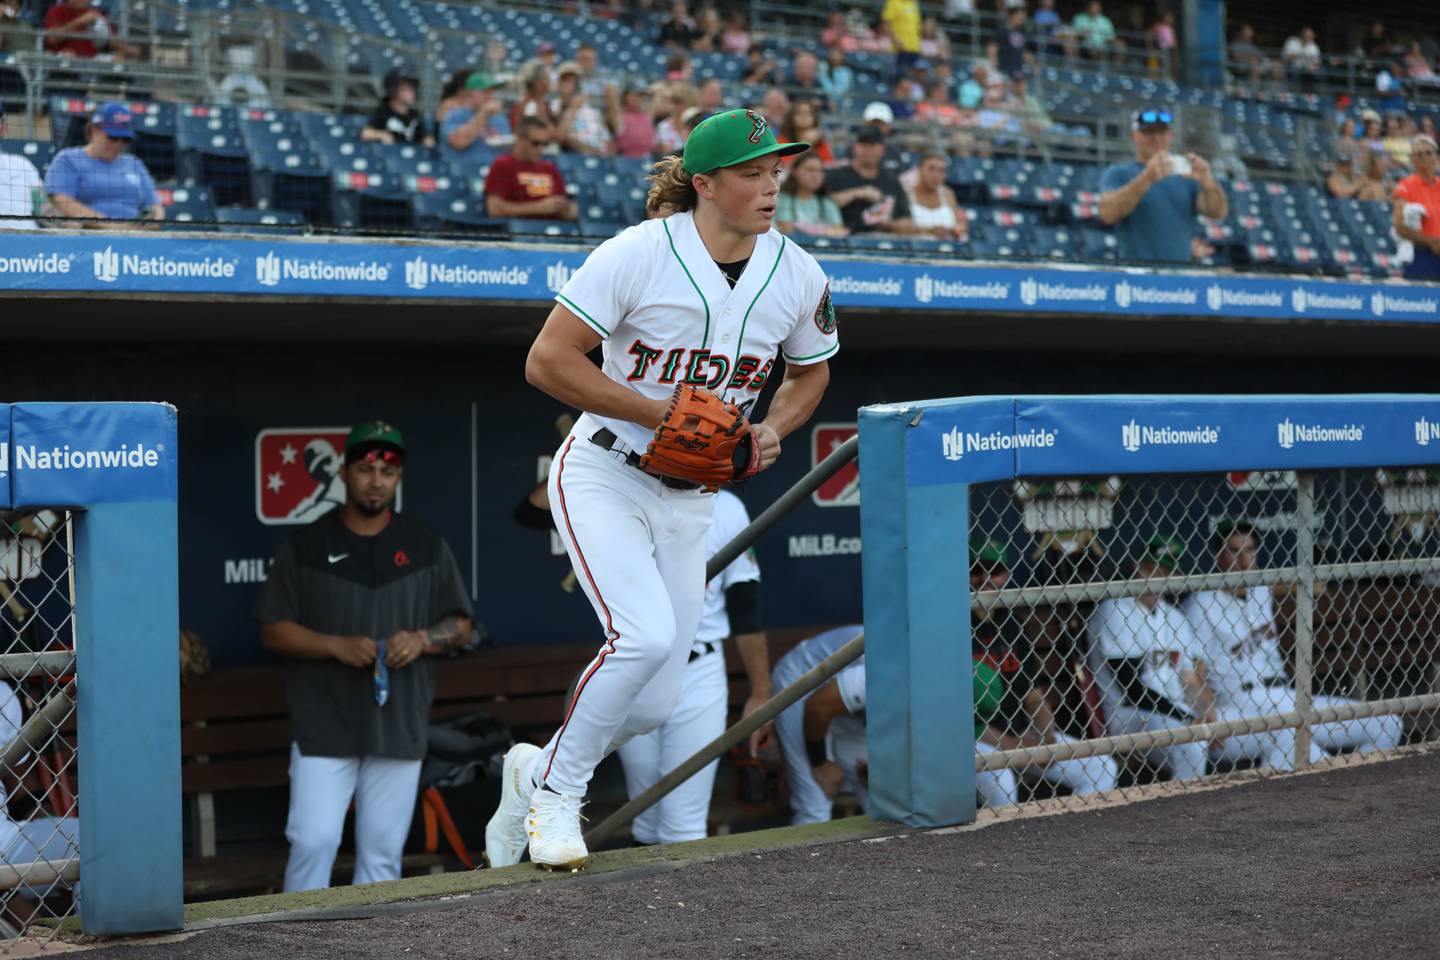 Jackson Holliday takes the field for Norfolk. (Photo by Sydney Smith, courtesy of the Norfolk Tides.)